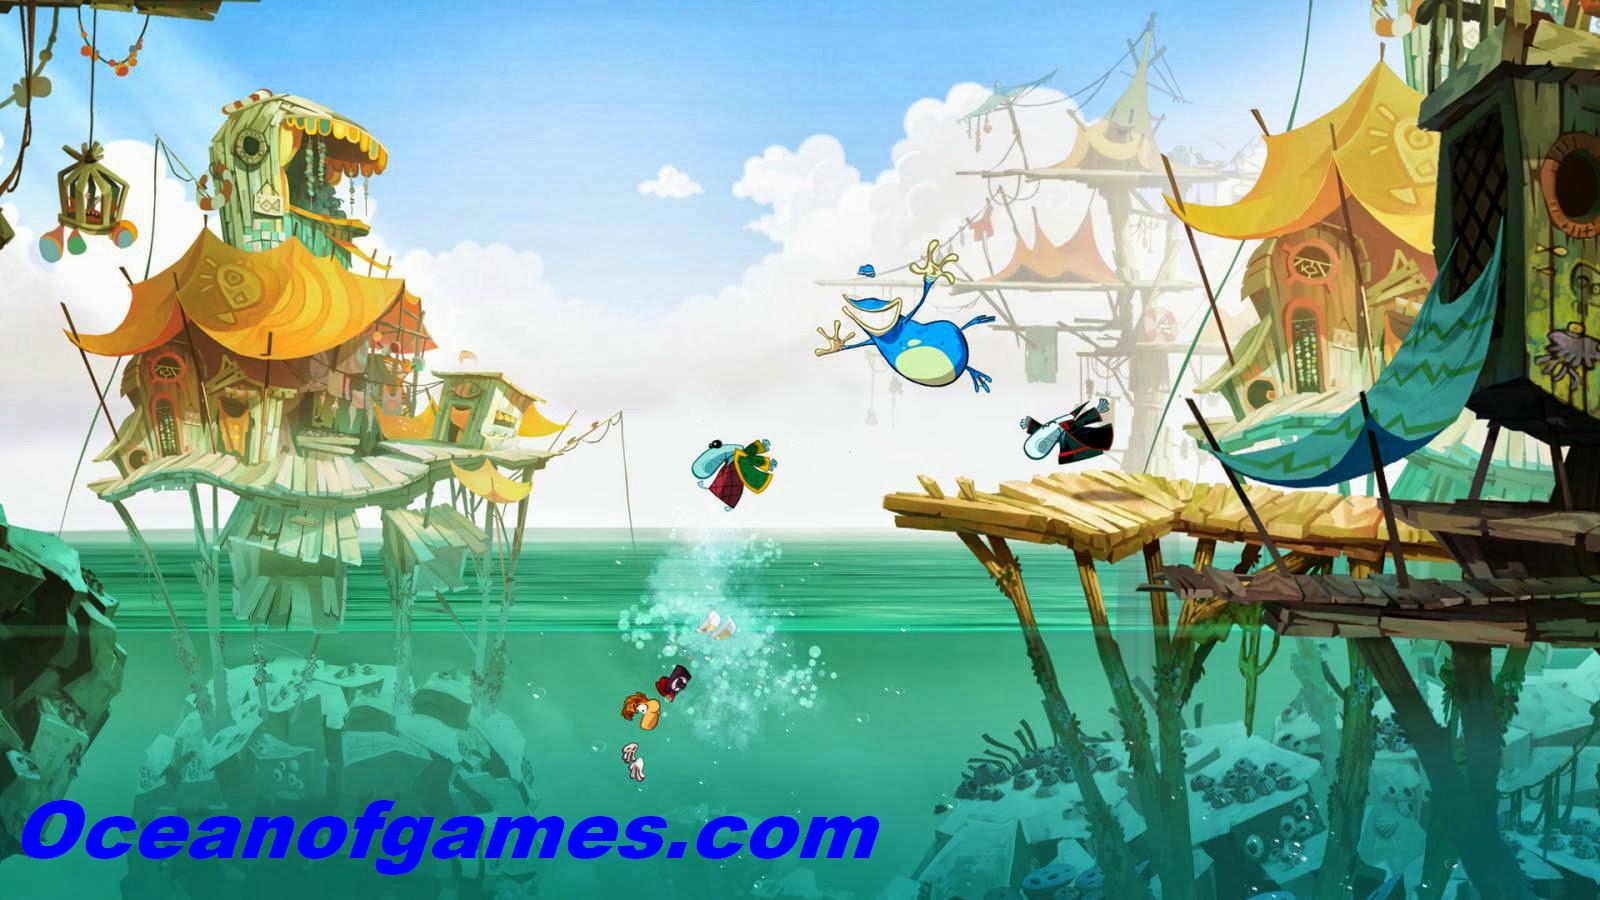 Rayman Legends: Free PC Game For Everyone - Computer Services Redcliffe